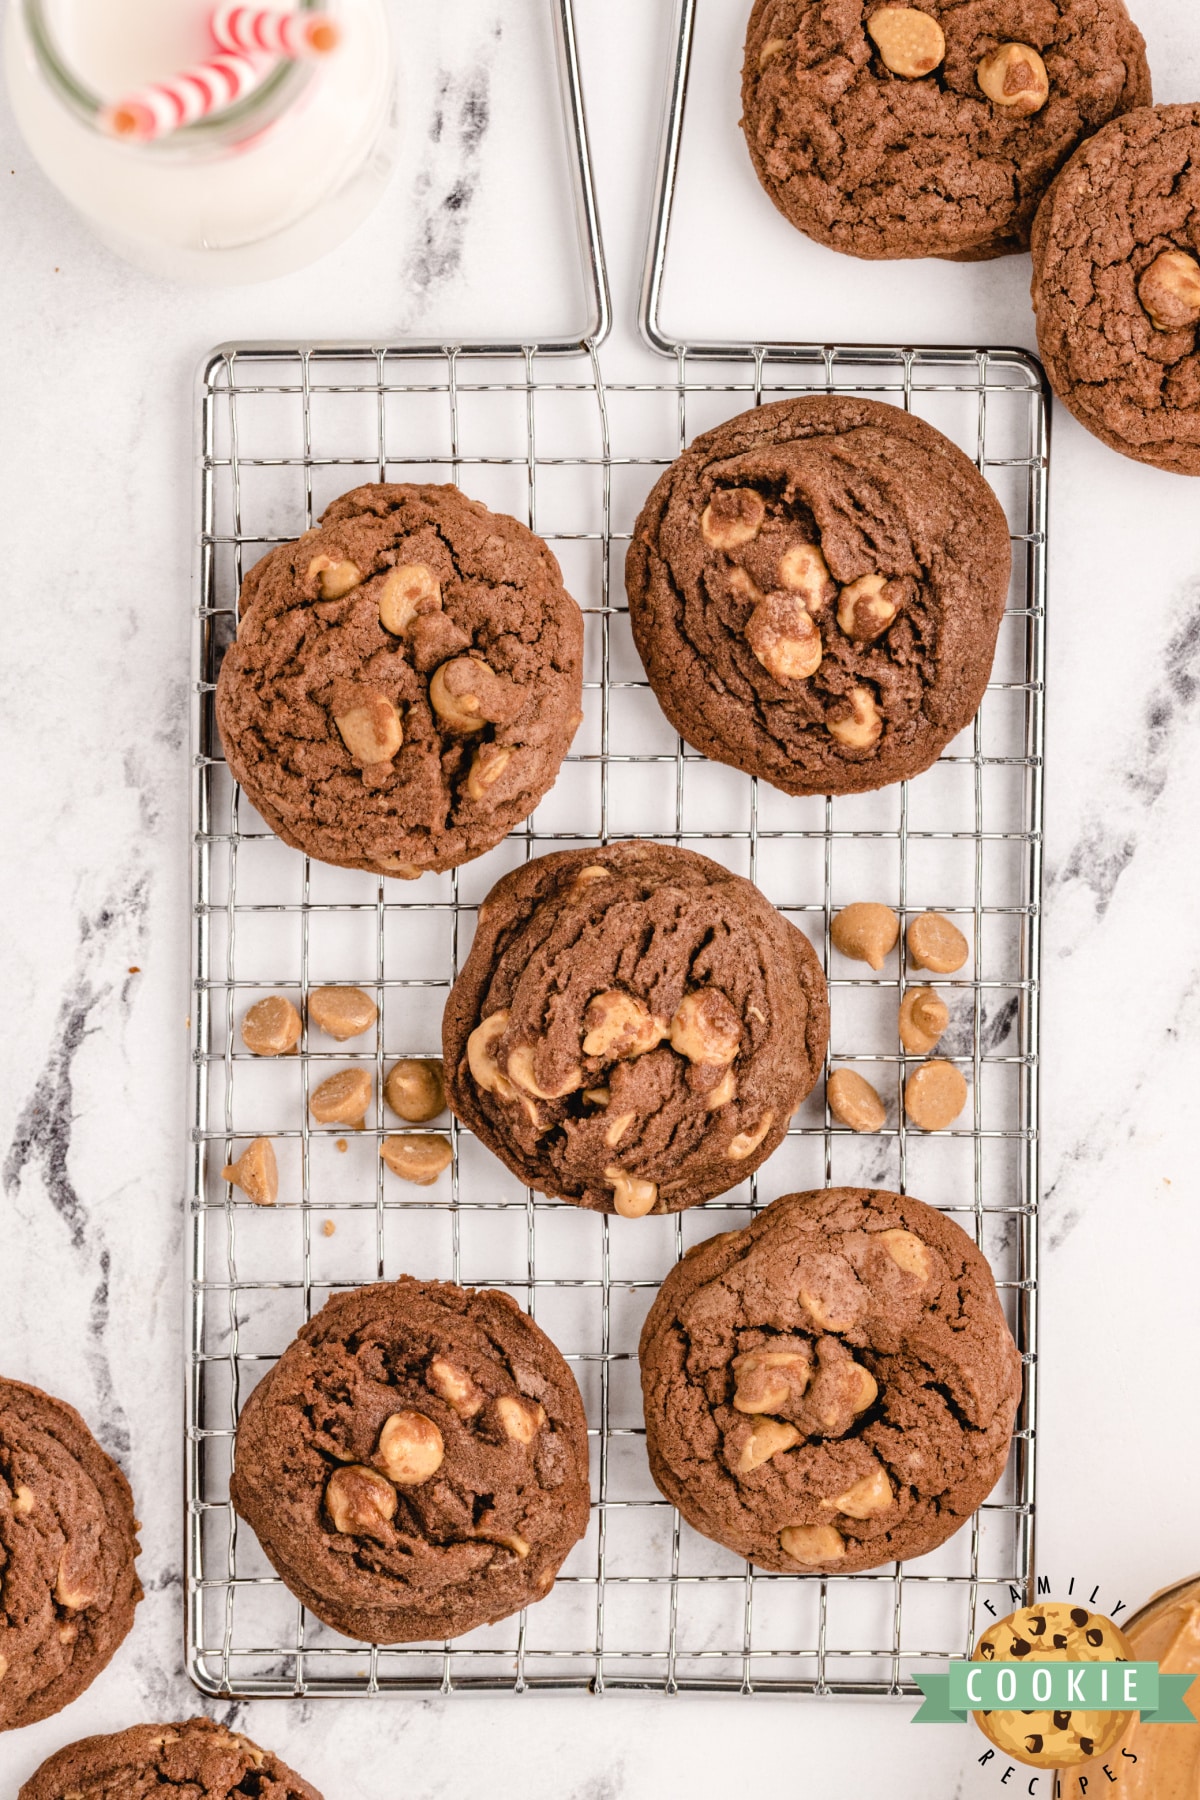 Chocolate cookies with Reese's peanut butter chips